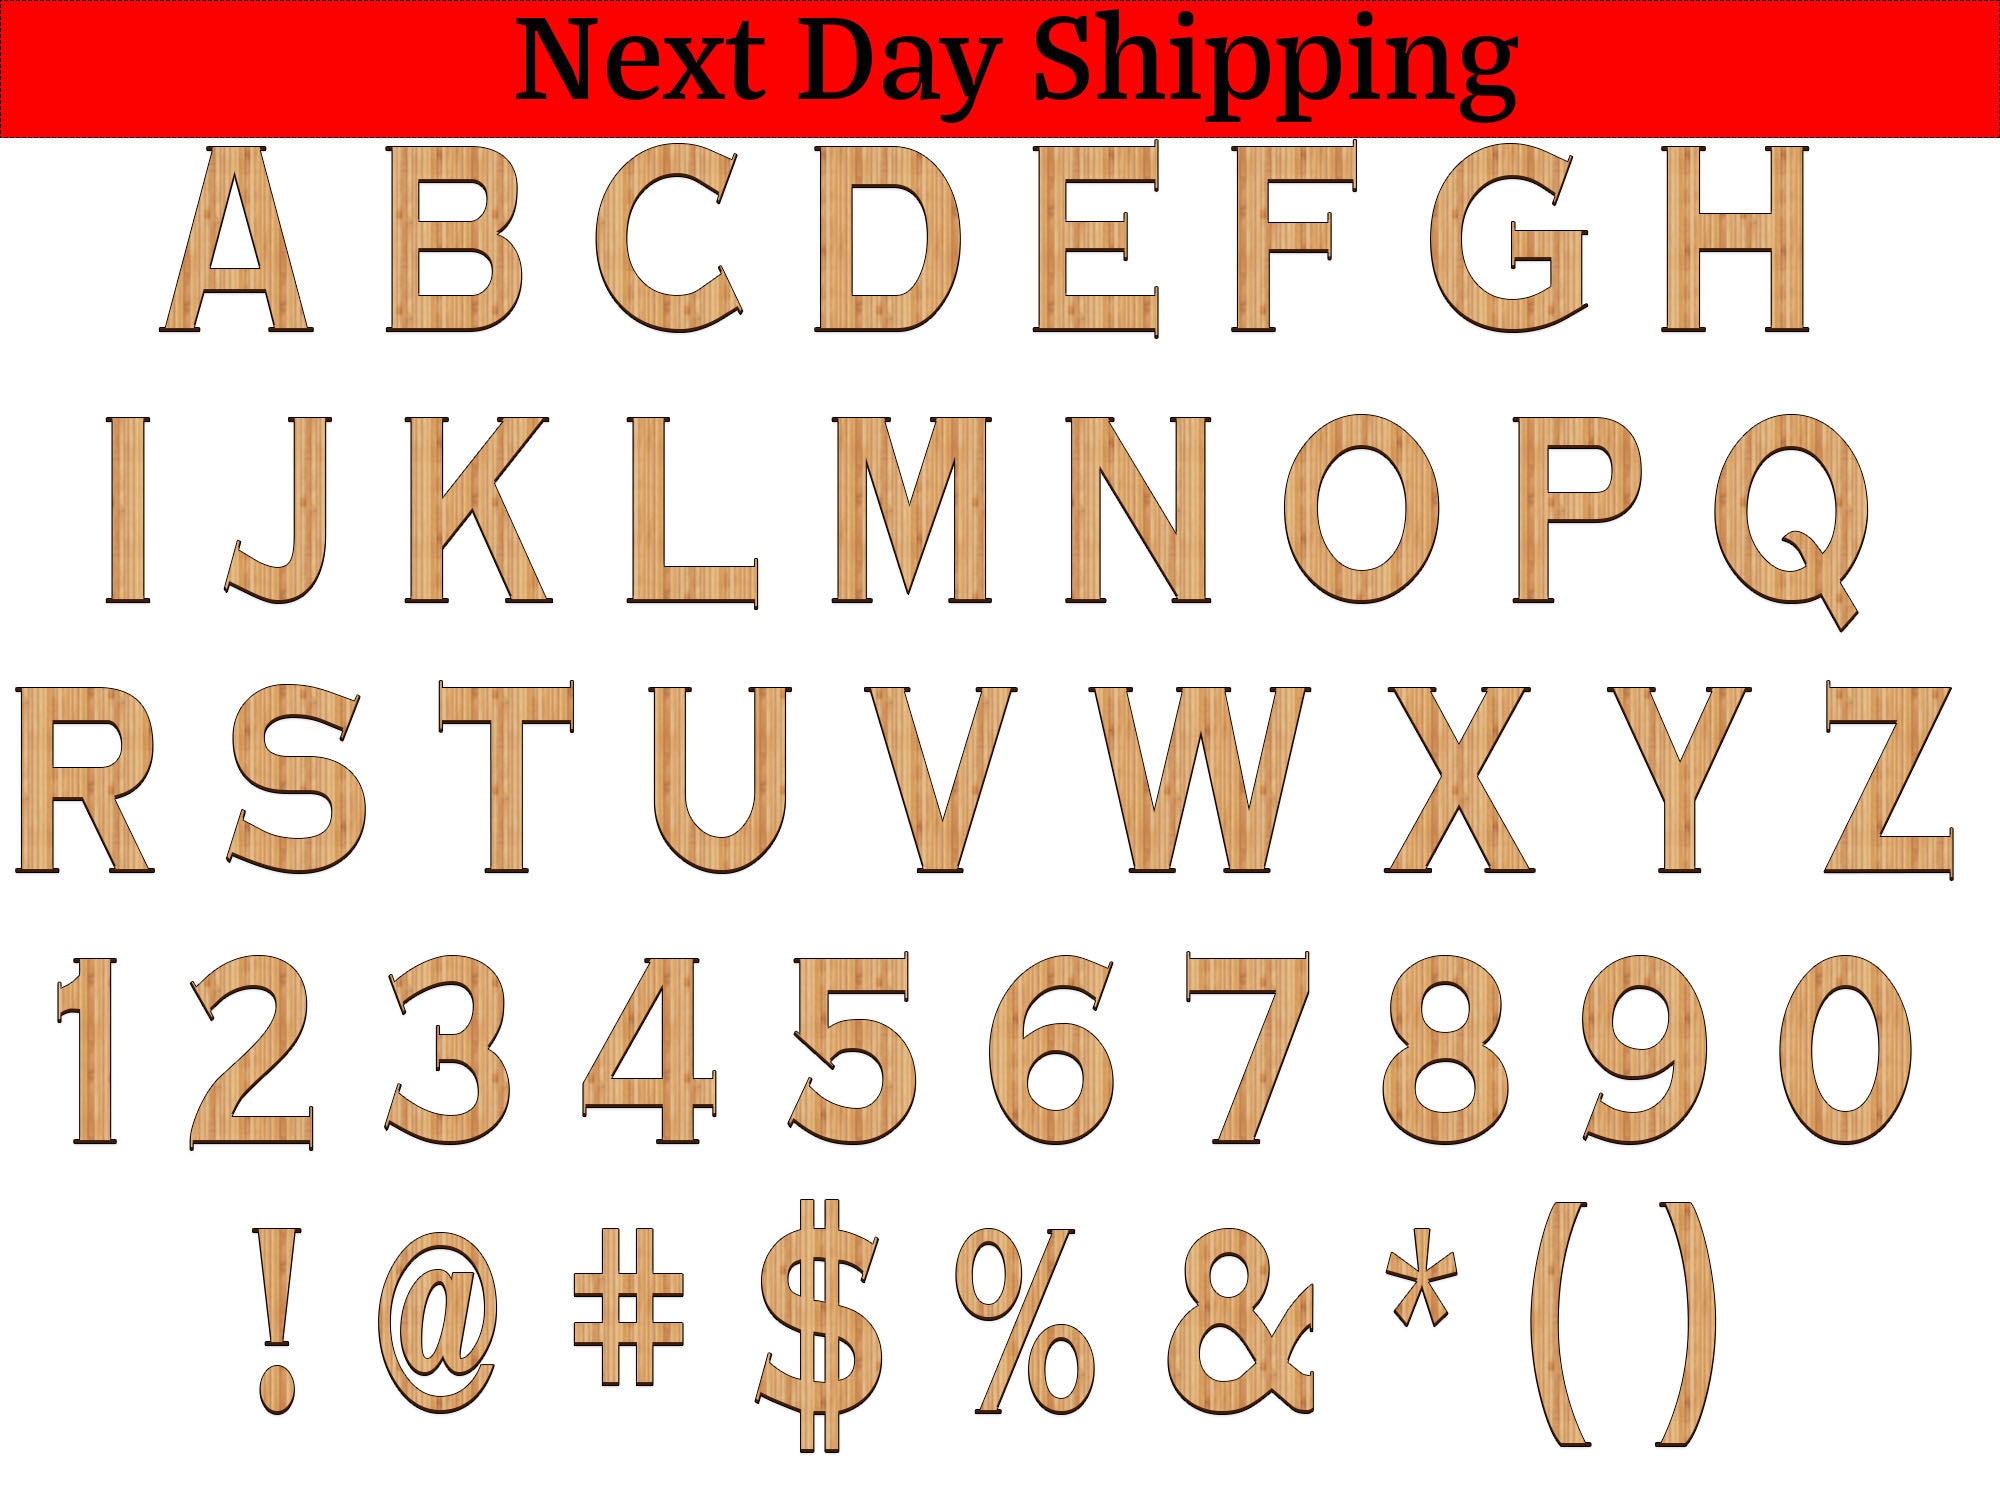  182 Pieces 2-1/2 Inch (2.5) Wooden Letters Craft Wood